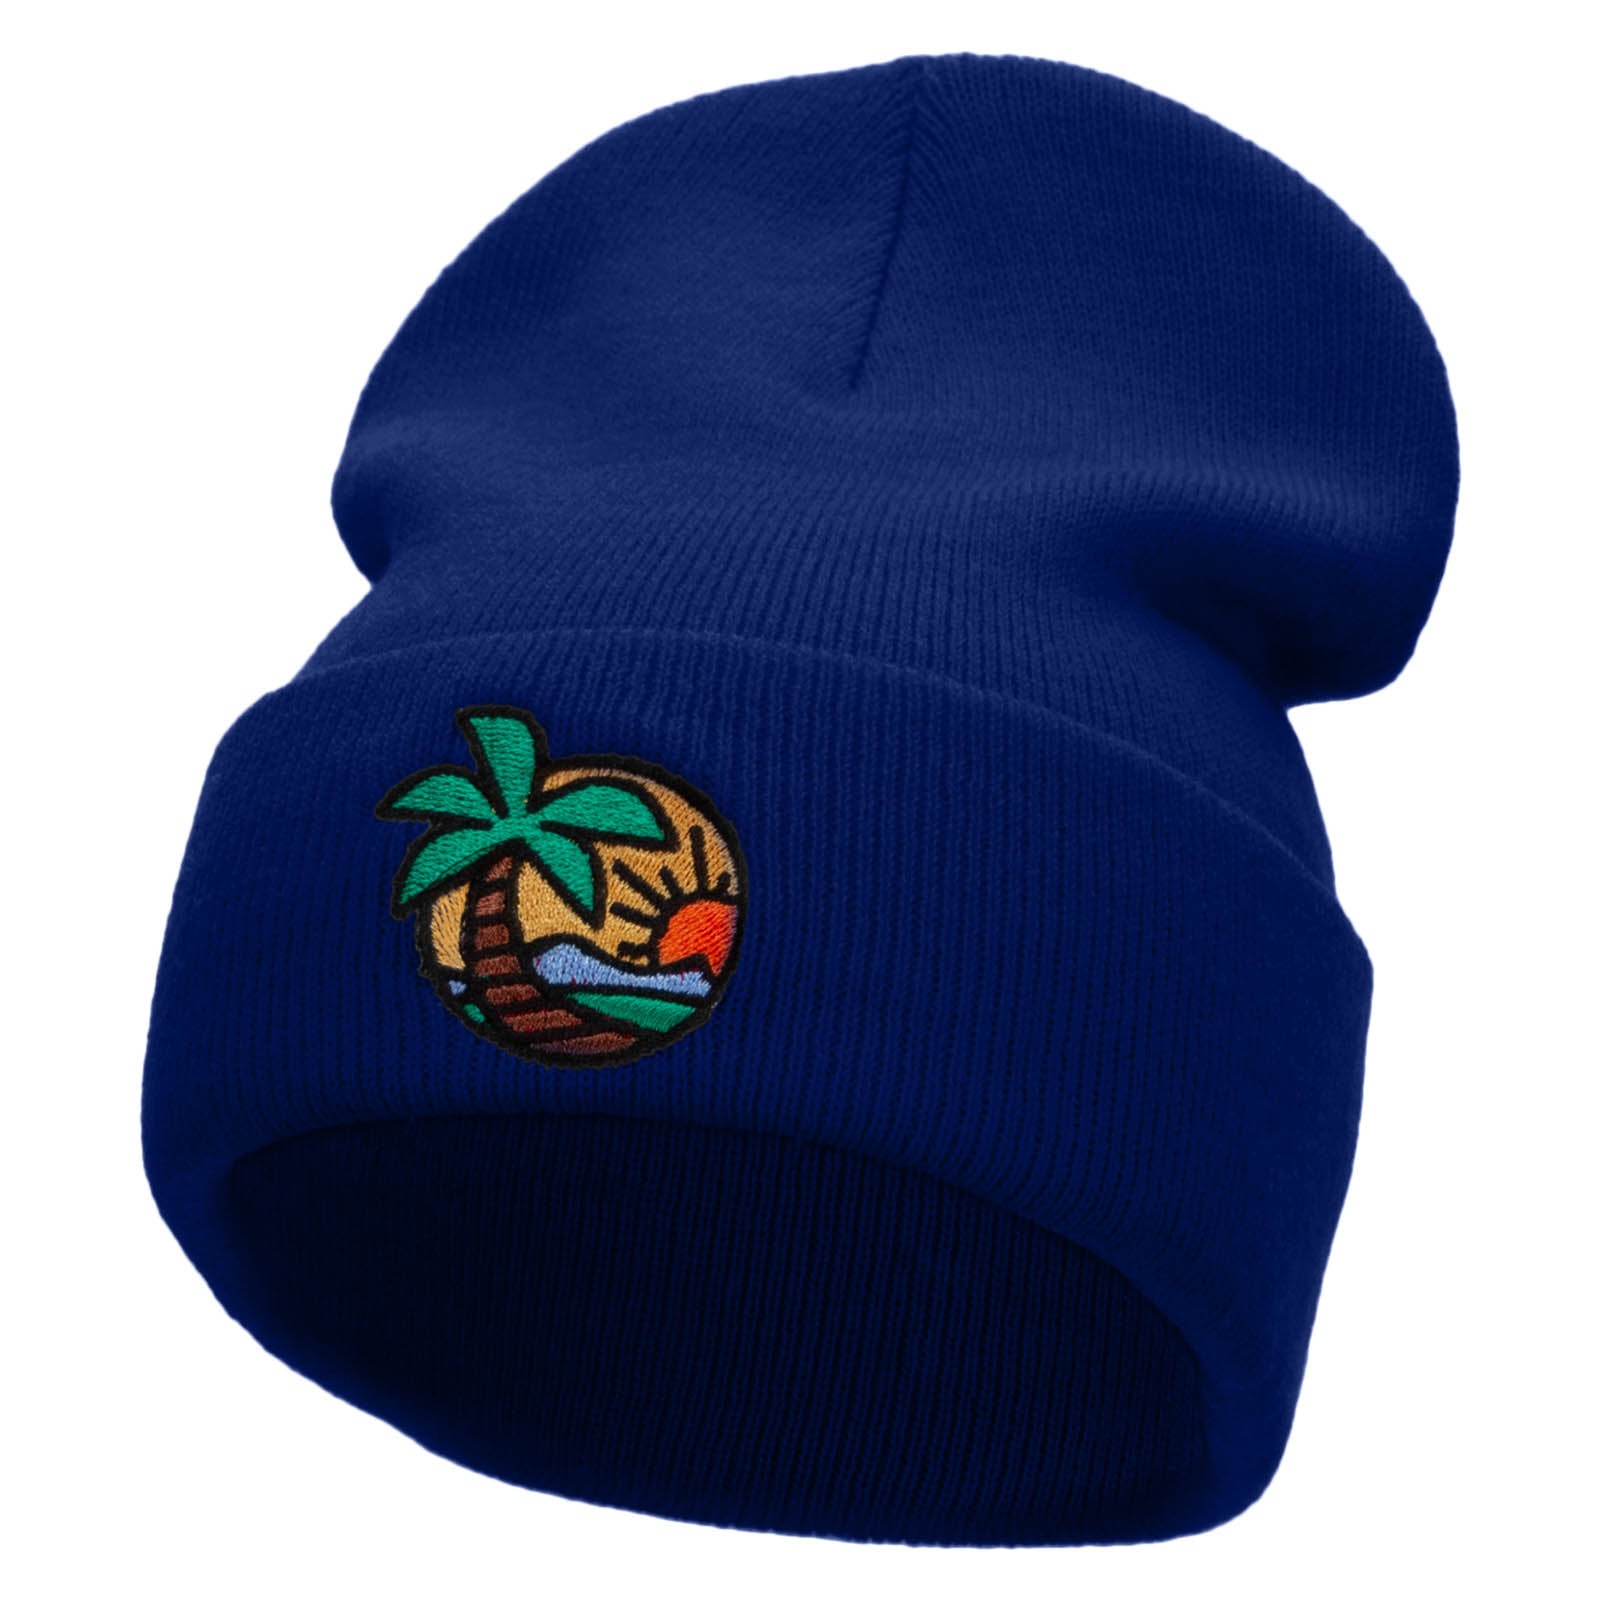 Vacation Time Embroidered 12 Inch Long Knitted Beanie - Royal OSFM